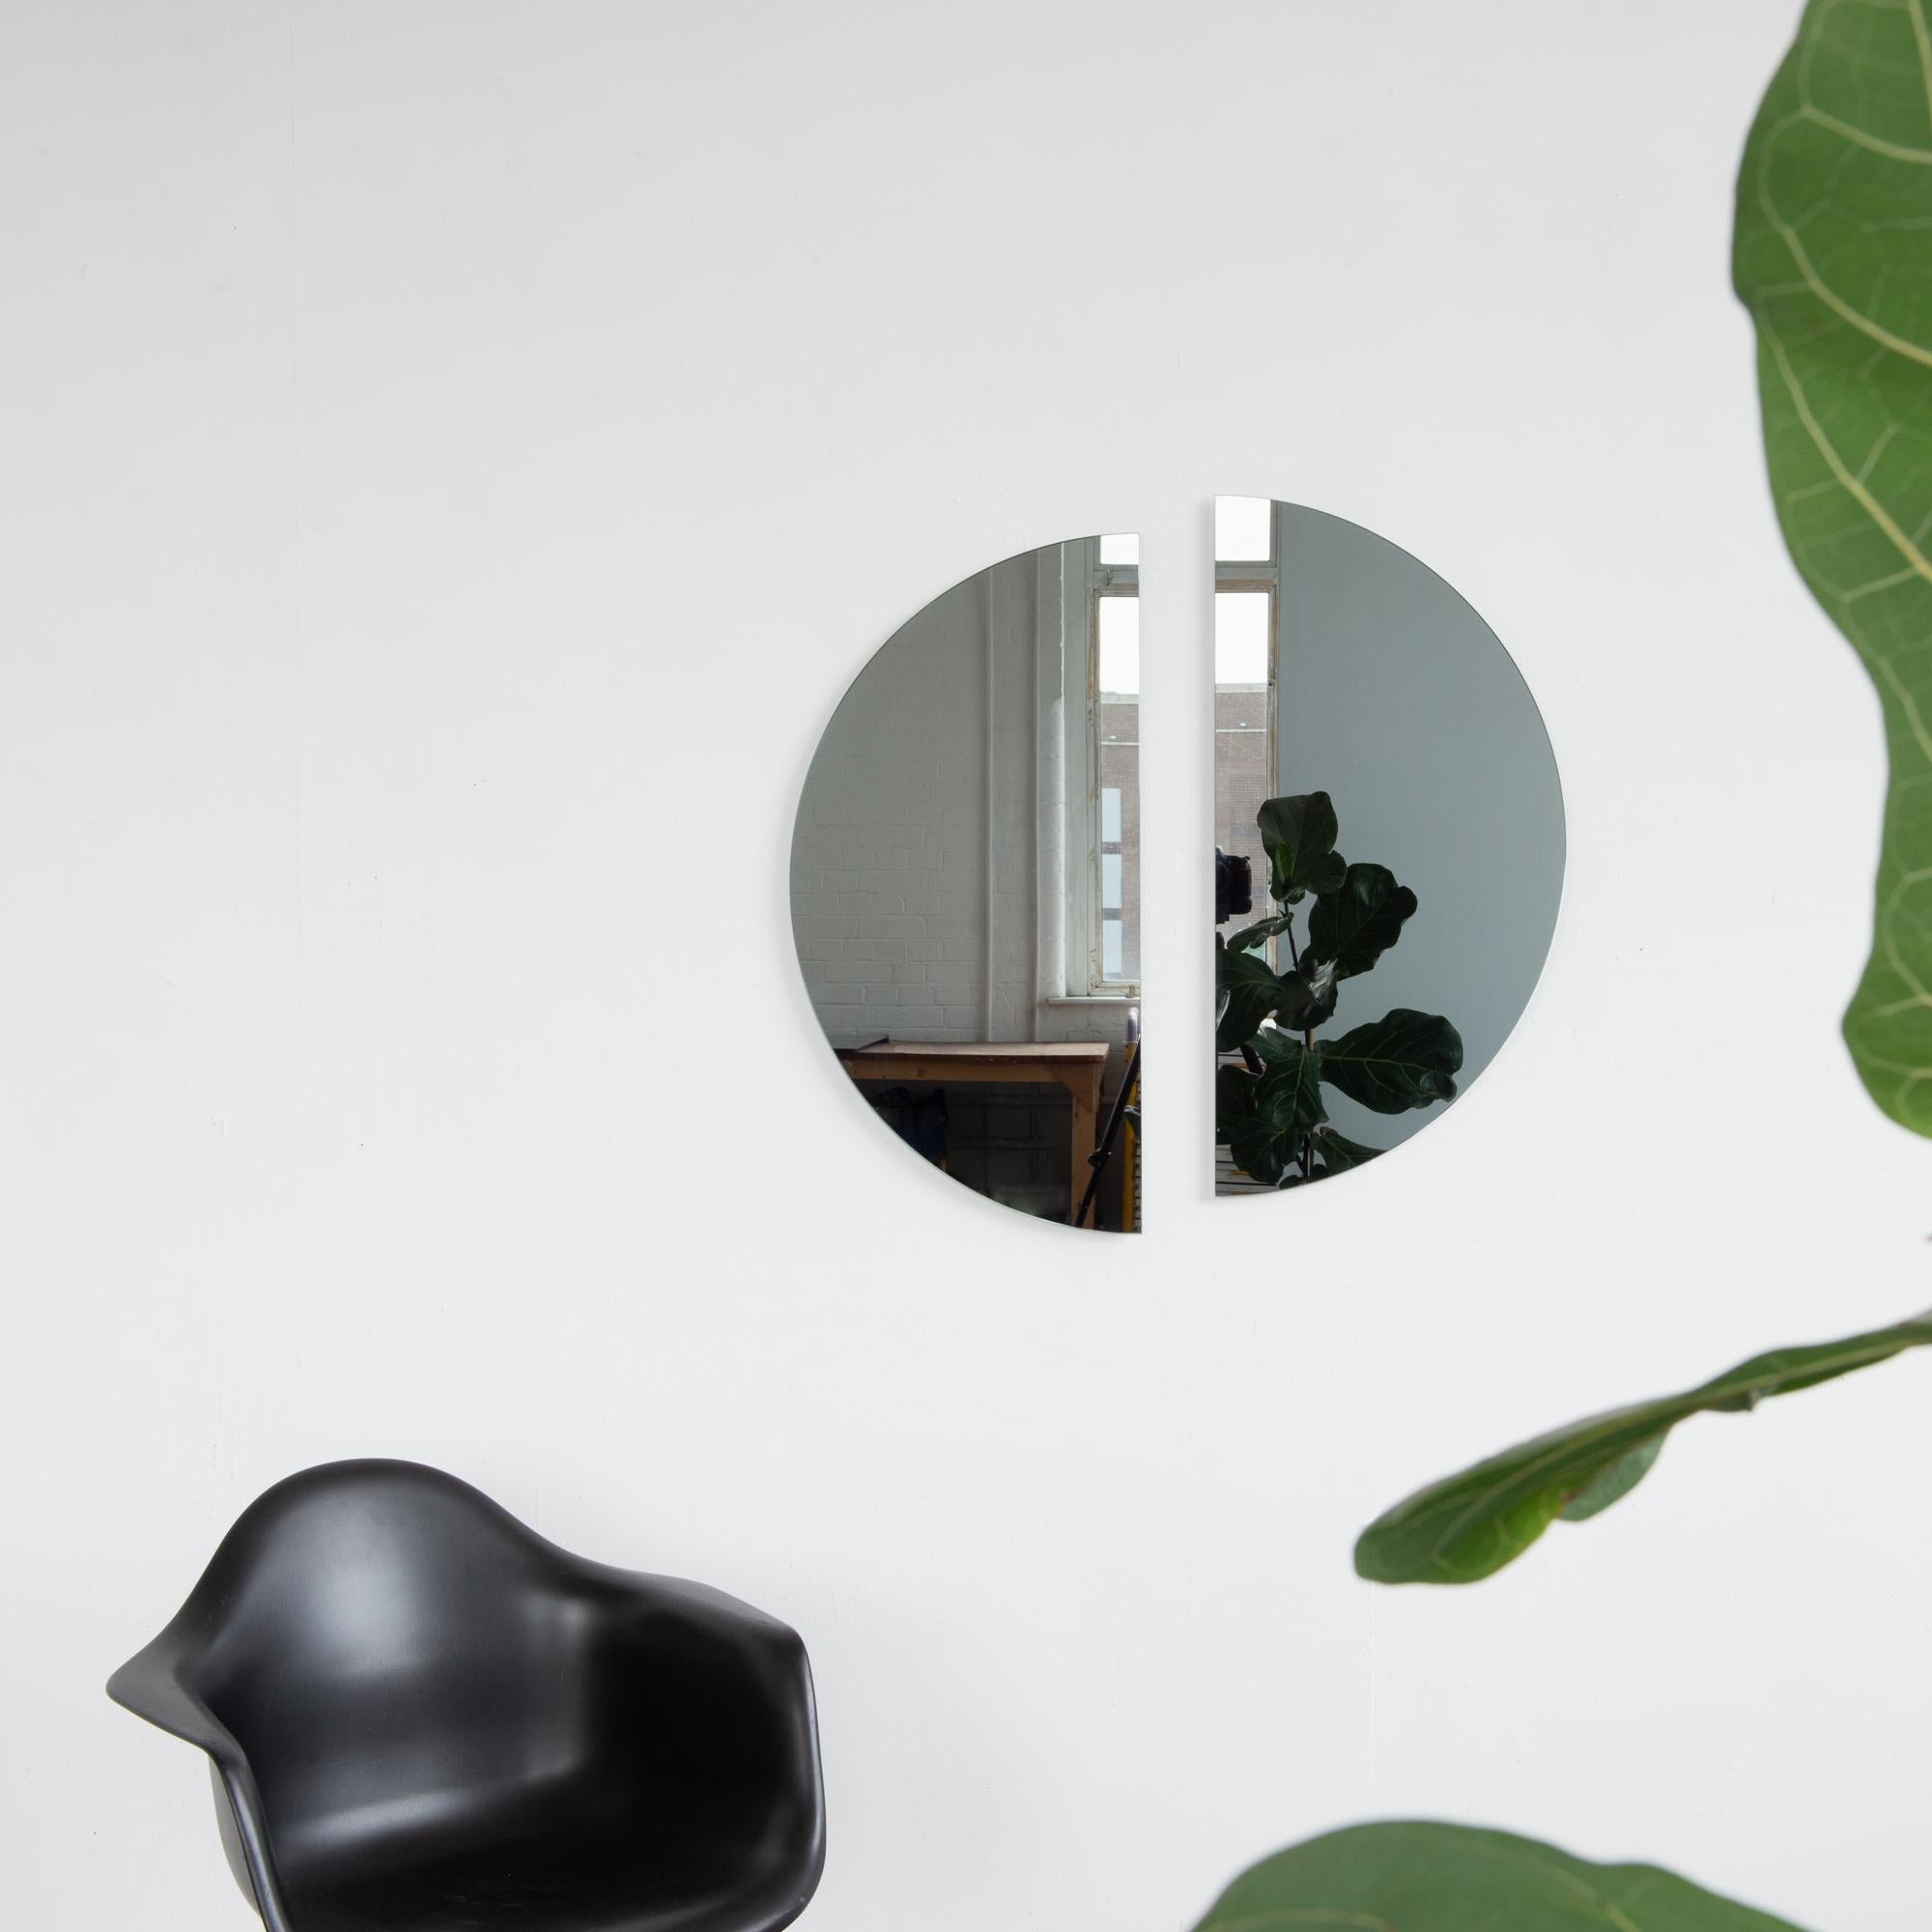 Set of two minimalist half-moon Luna™ black tinted frameless mirrors with a floating effect. Fitted with a quality hanging system for a flexible installation in 4 different directions. Designed and made in London, UK. 

Our mirrors are designed with